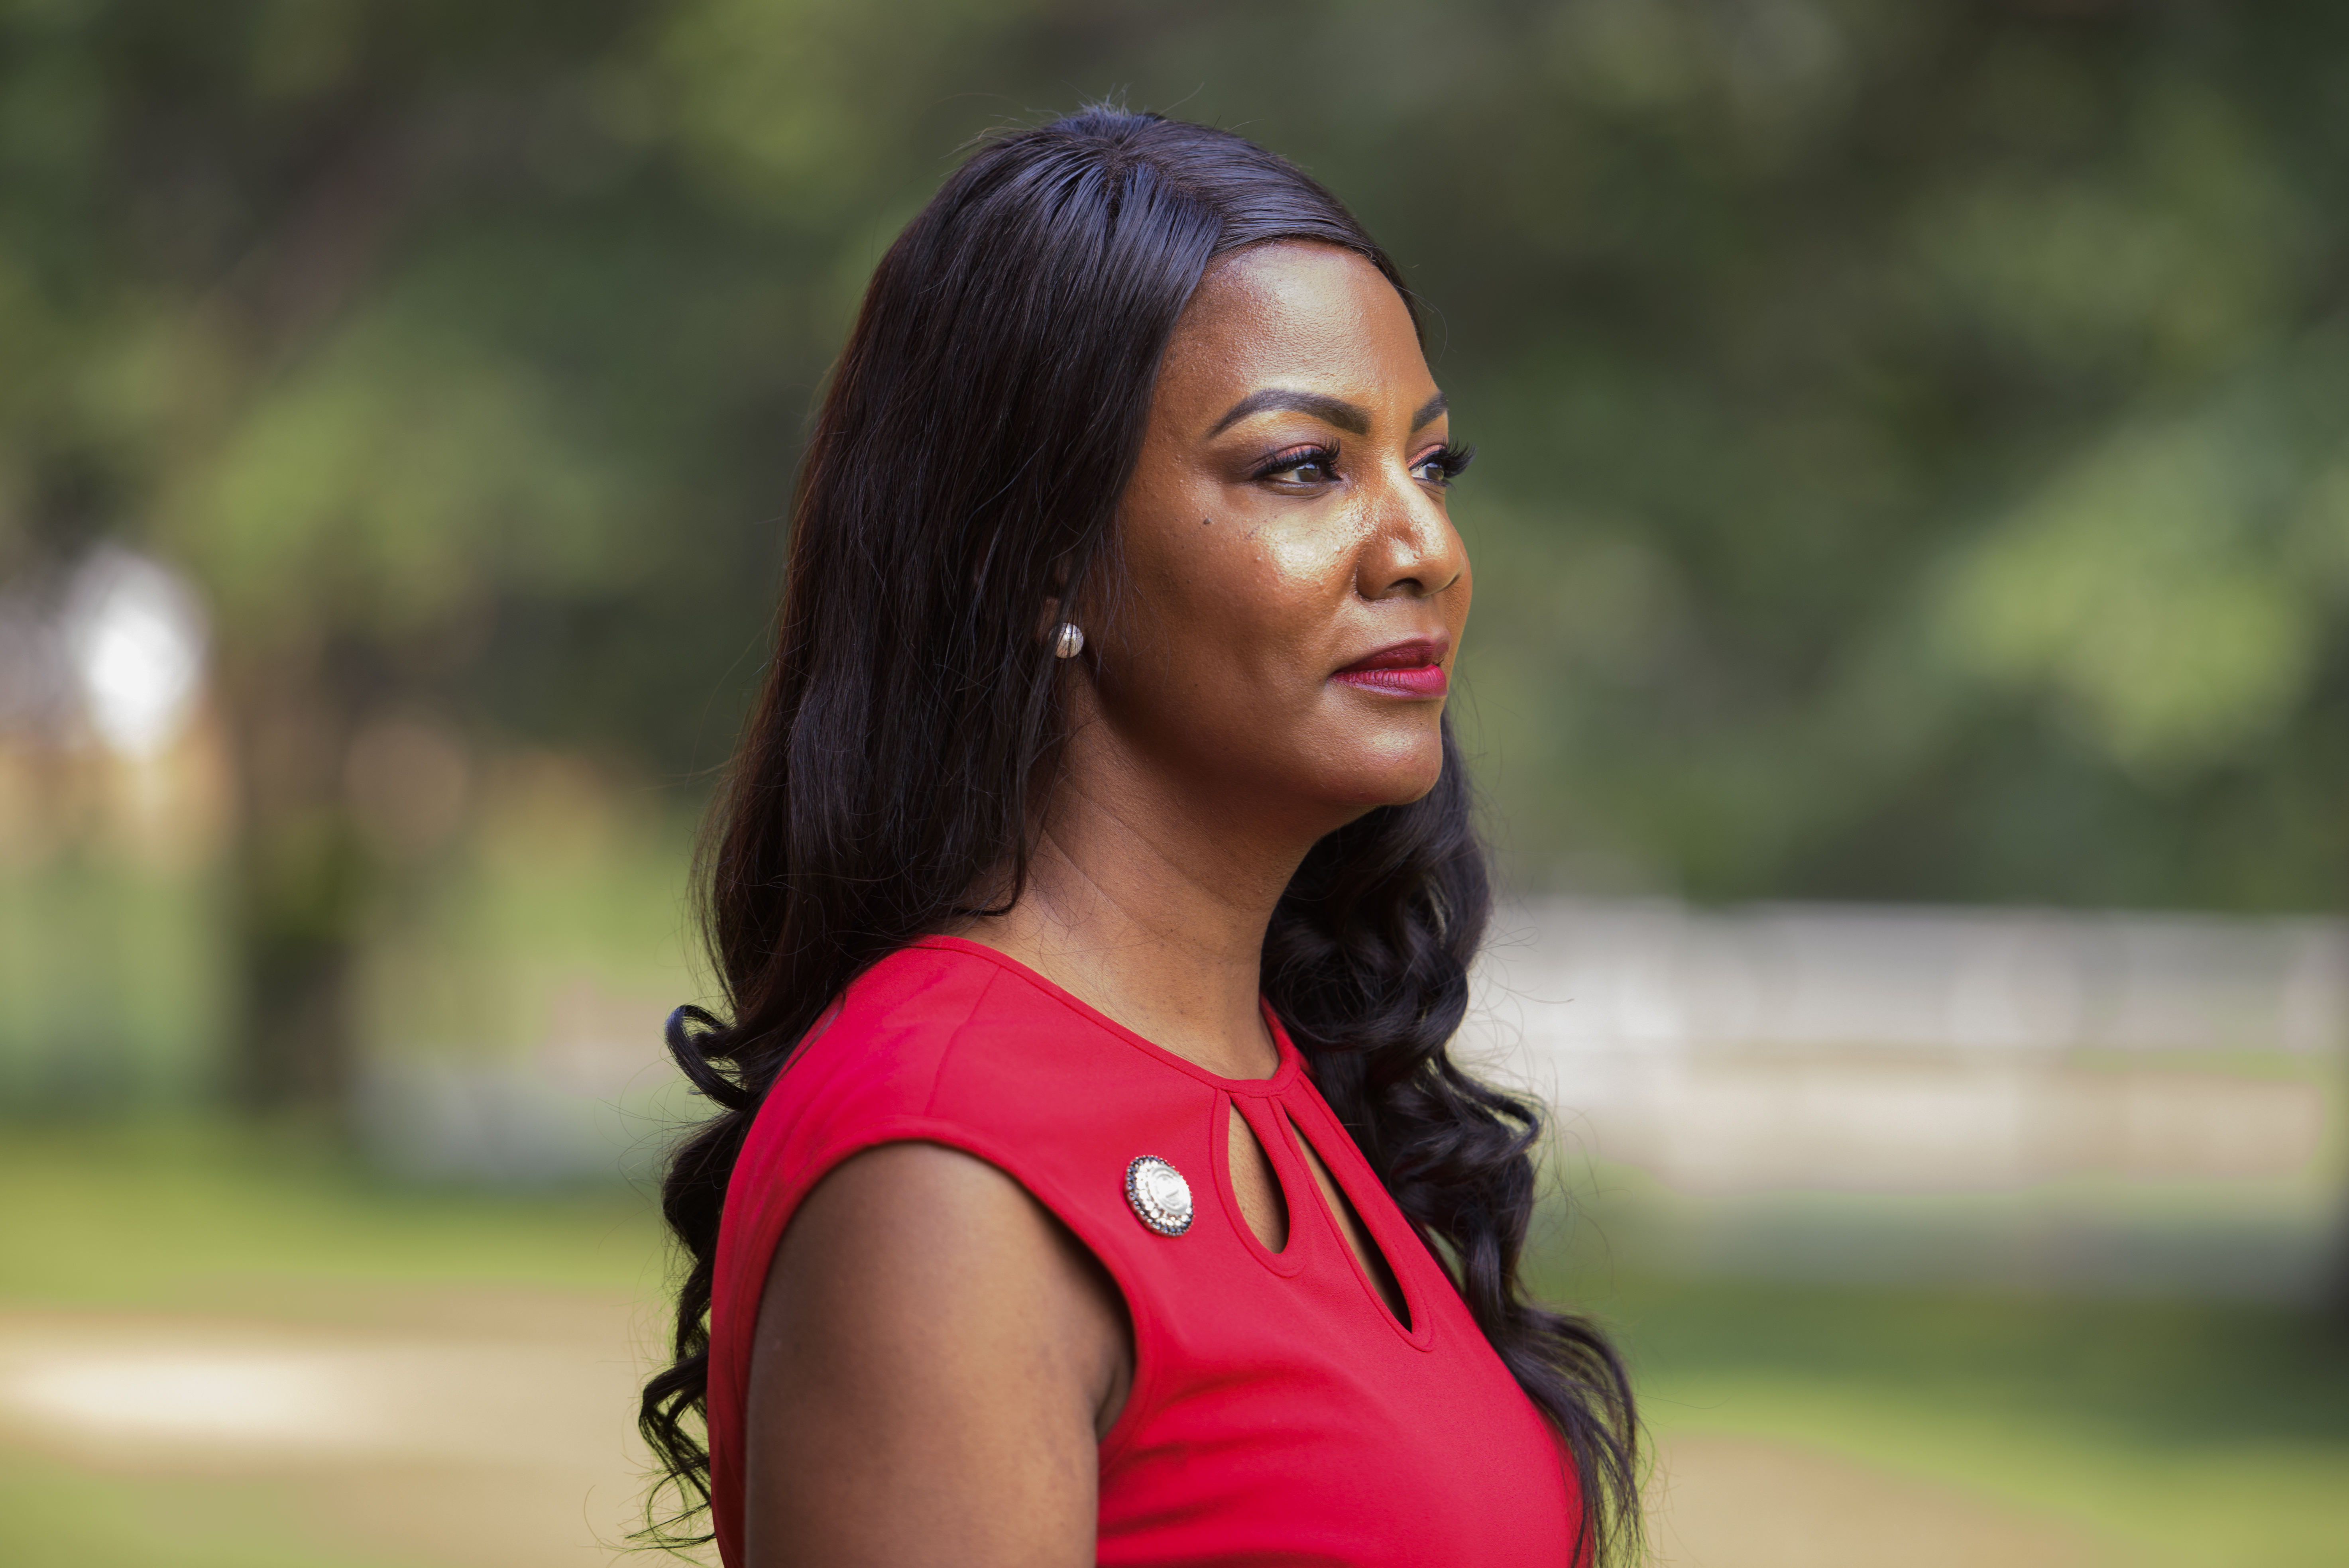 Story will focus on the St. Louis mayor, Tishaura Jones, and her effort to make good on the progressive promises she was elected on this spring.